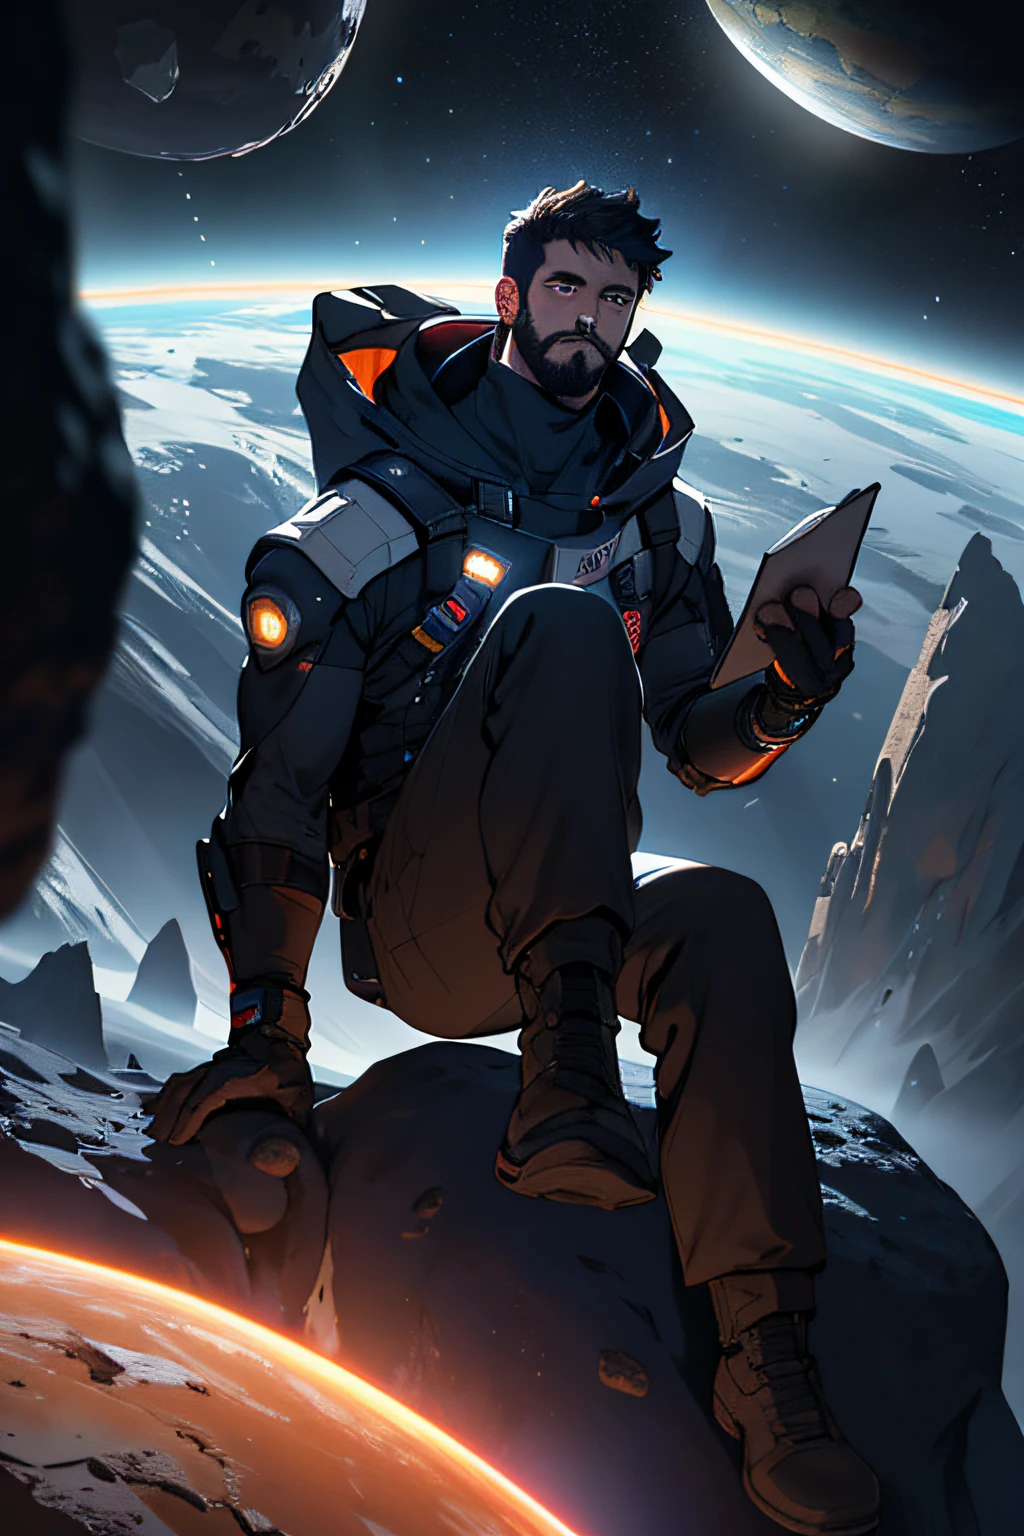 Draw a young programmer, sitting on a research platform floating in the middle of an asteroid belt. He is studying with a notebook, surrounded by several asteroids glowing with fiery auras. Dramatic lighting from distant stars and planets illuminates the scene, casting deep shadows on the suit. The young man looks confident and determined, looking at the vast and mysterious universe with wonder and respect,facial hair, cowboy shot,